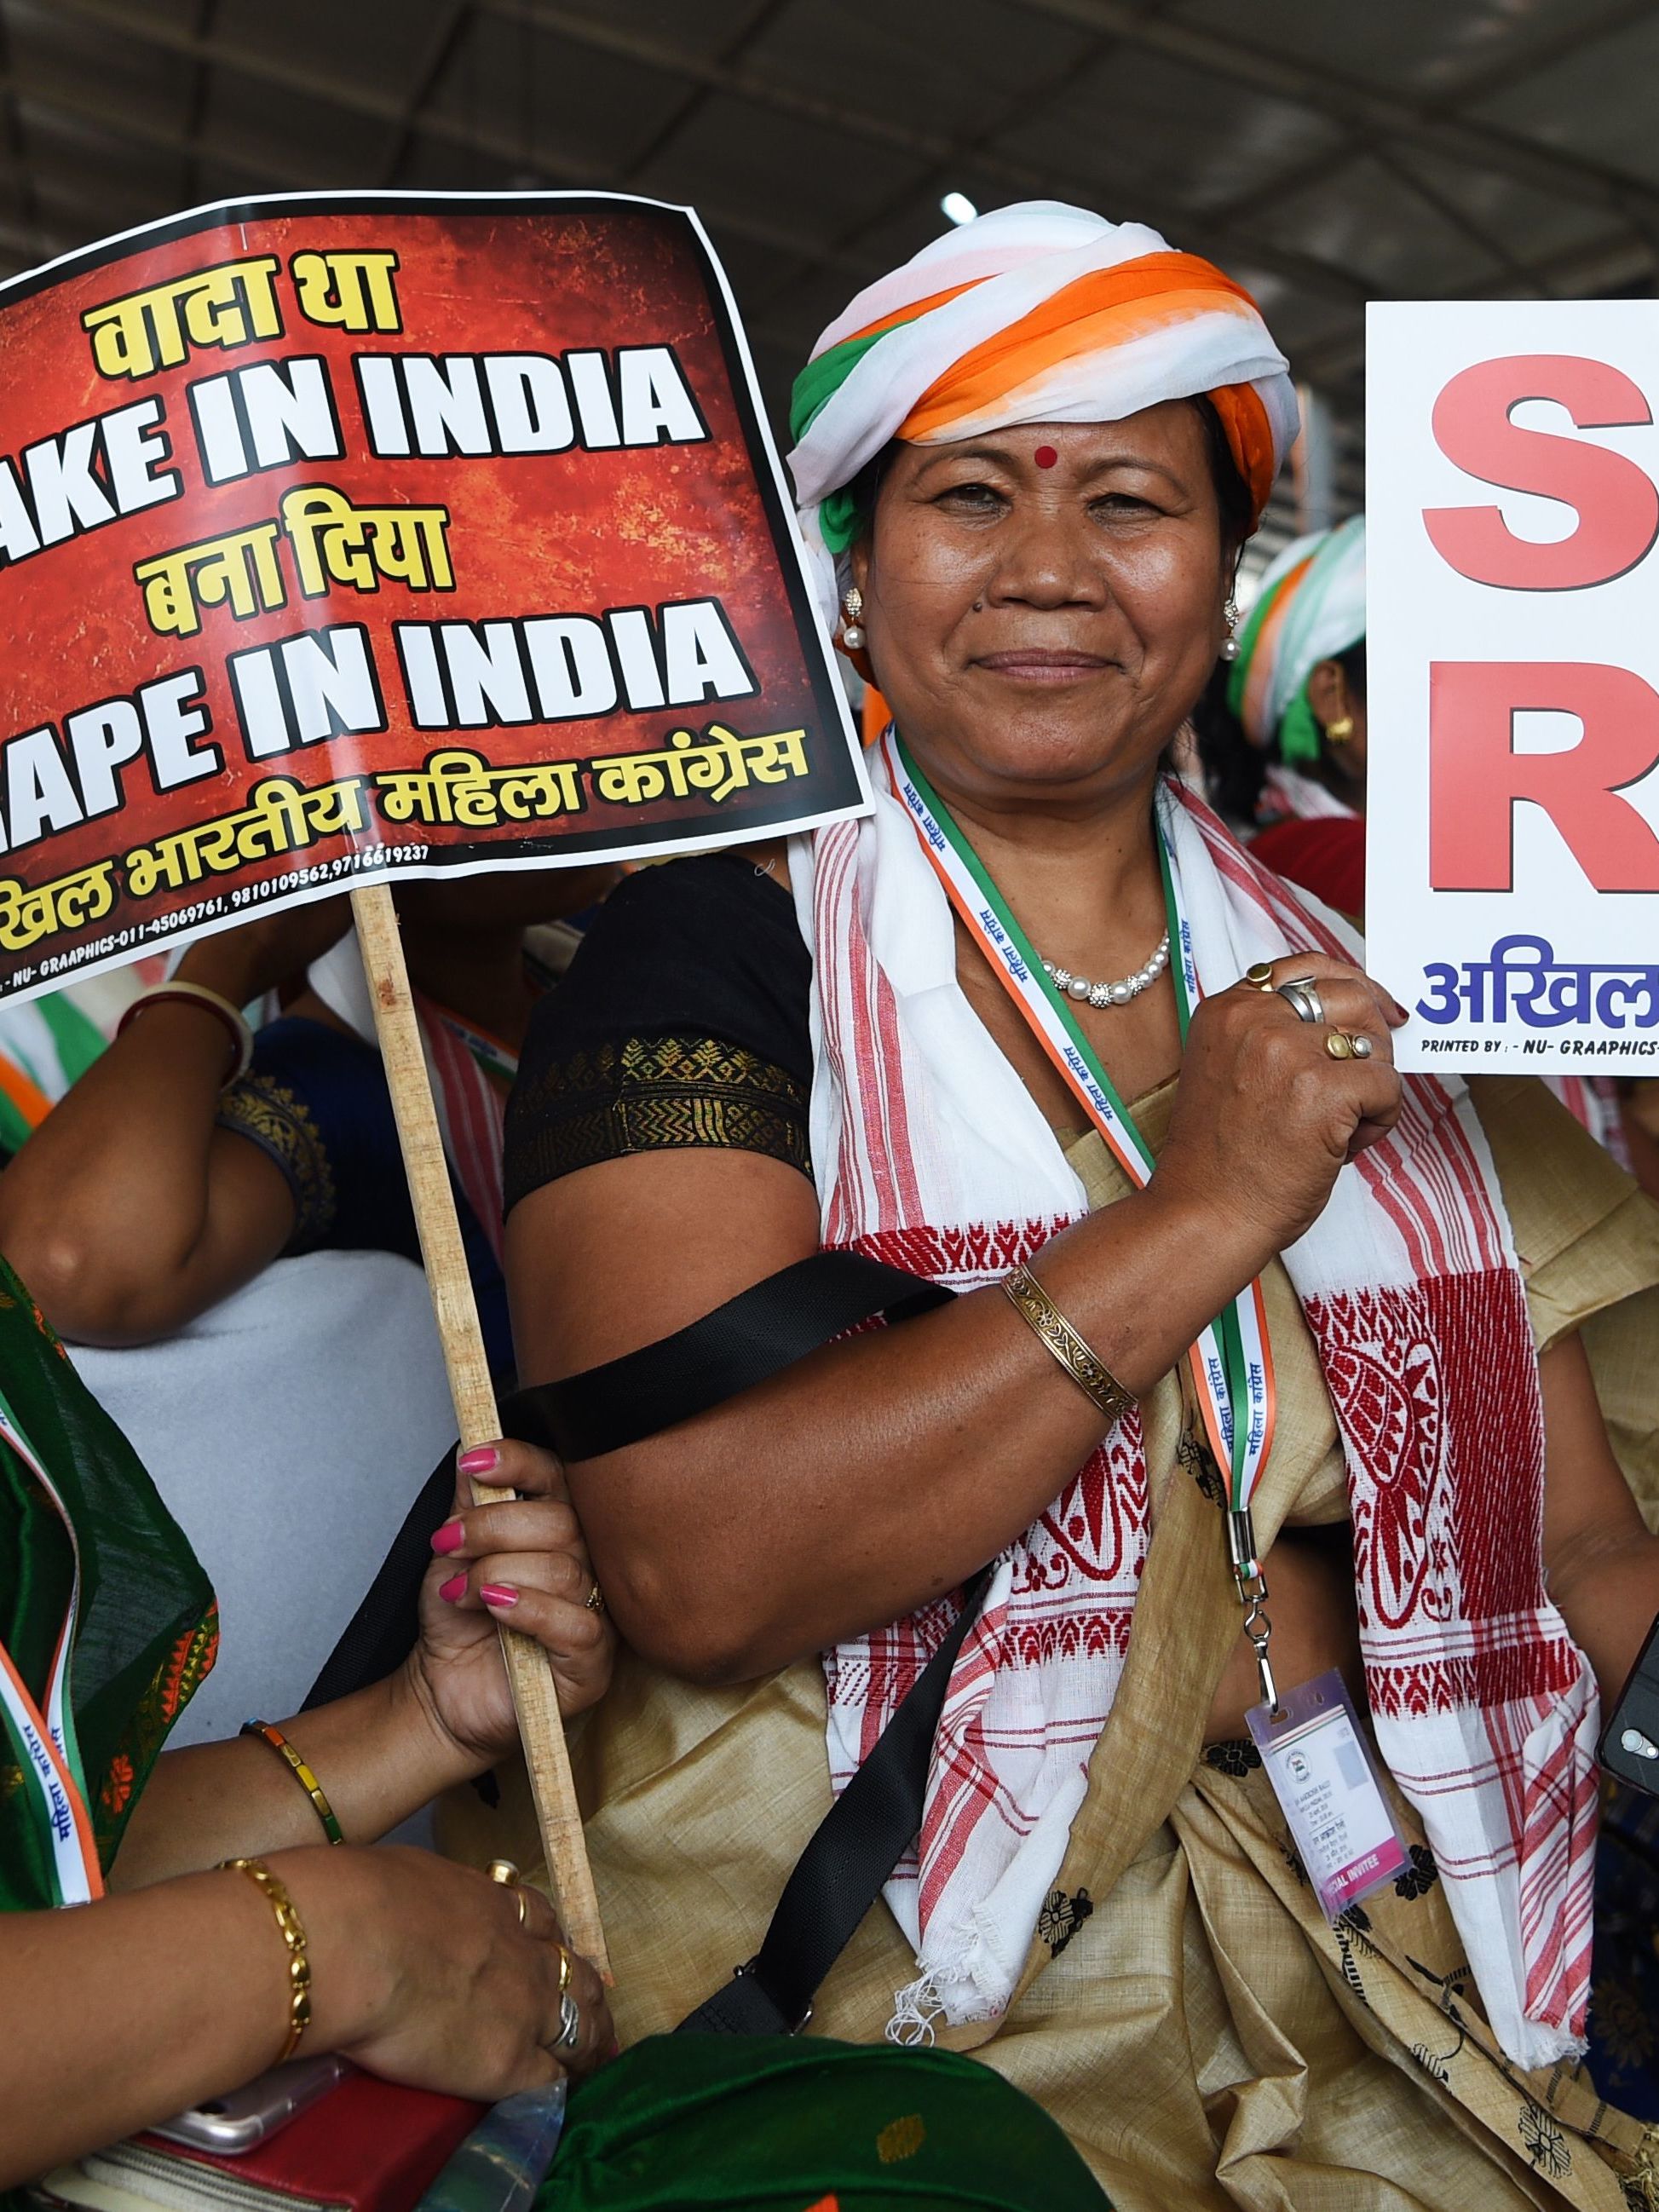 India launches sex offenders registry, amid spate of rape cases | CNN